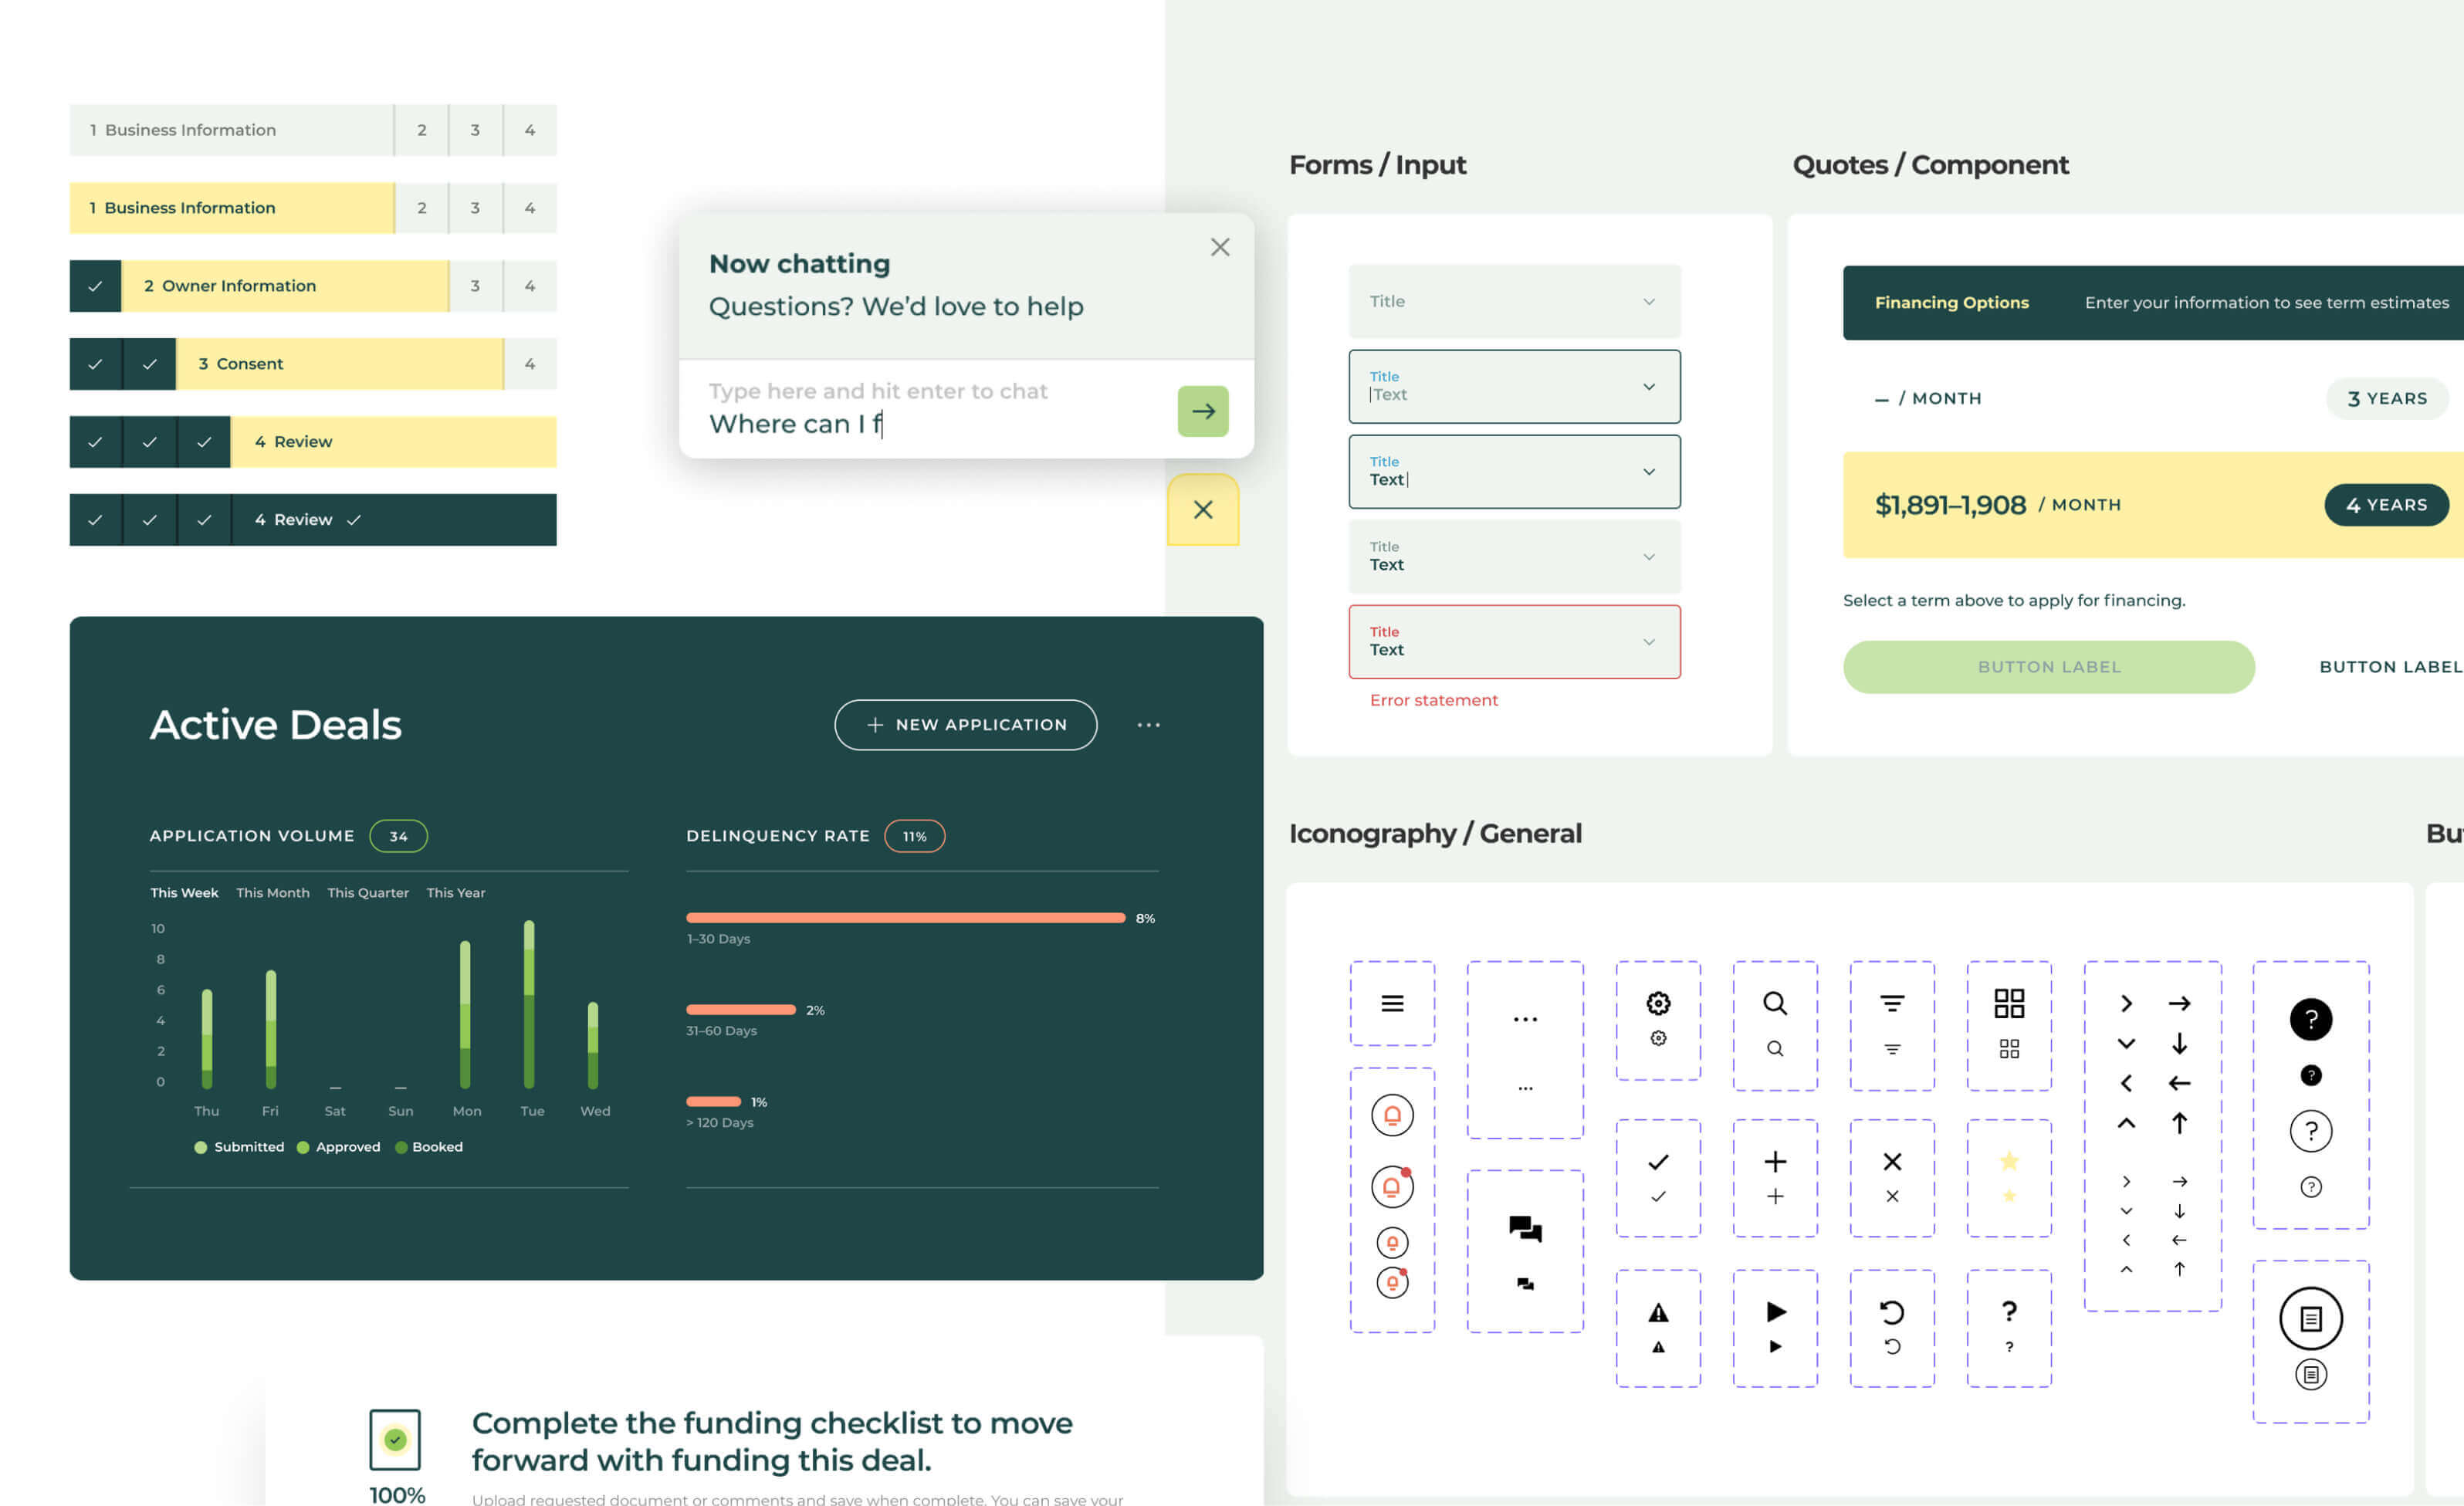 Collage of artifacts from the Amur design system. On the left a selection of components; mobile progress indication, two types of bar charts, a chat box. On the right, styles of input fields, and iconography examples.